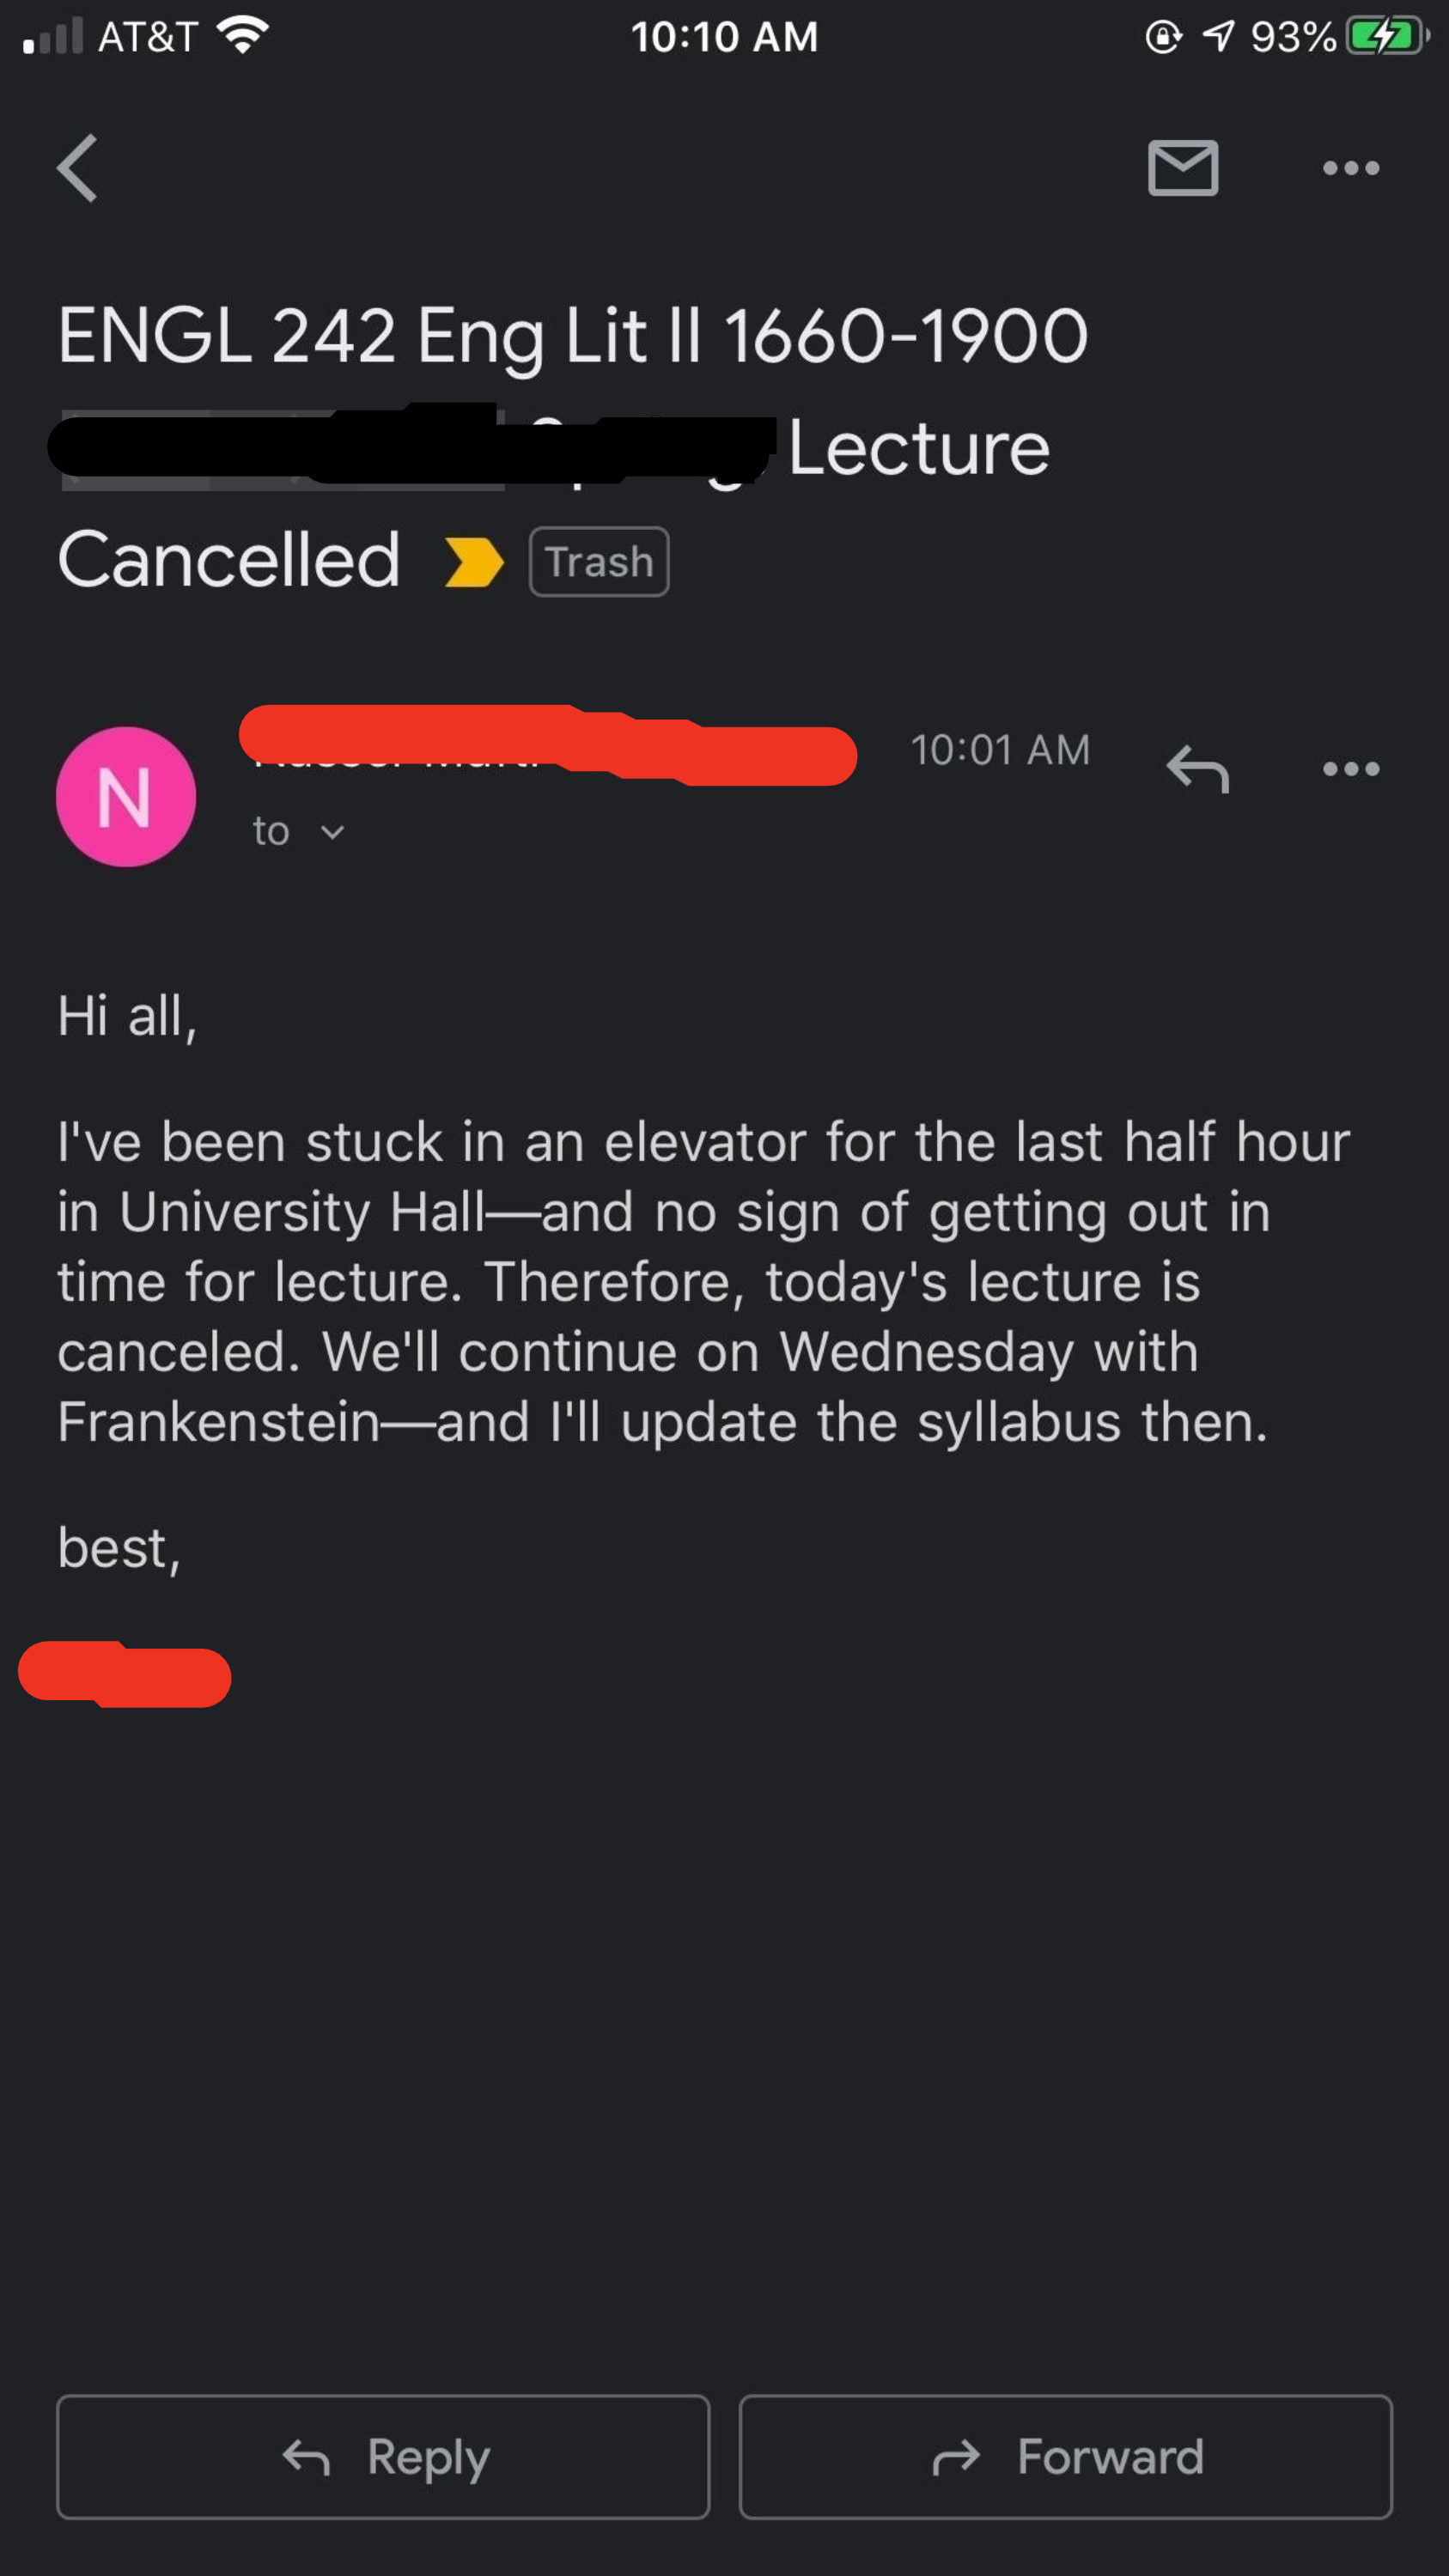 English lit professor&#x27;s text: &quot;I&#x27;ve been stuck in an elevator for the last half hour in University Hall — and no sign of getting out in time for lecture; therefore, today&#x27;s lecture is canceled&quot;